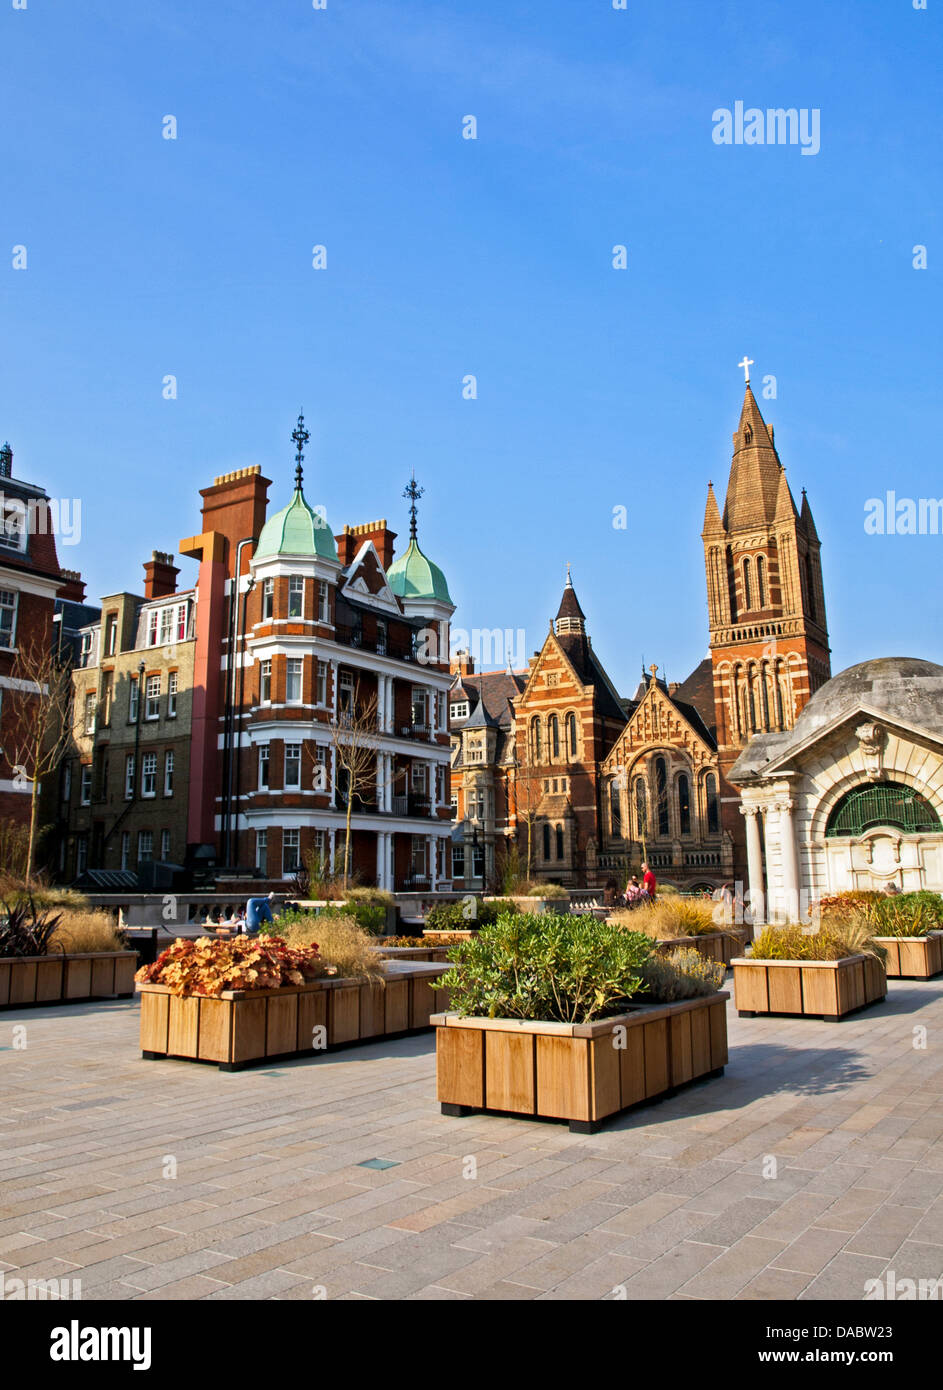 Brown Hart Gardens, a little known public garden on top of an electricity  substation, located off Duke Street near Oxford Street Stock Photo - Alamy